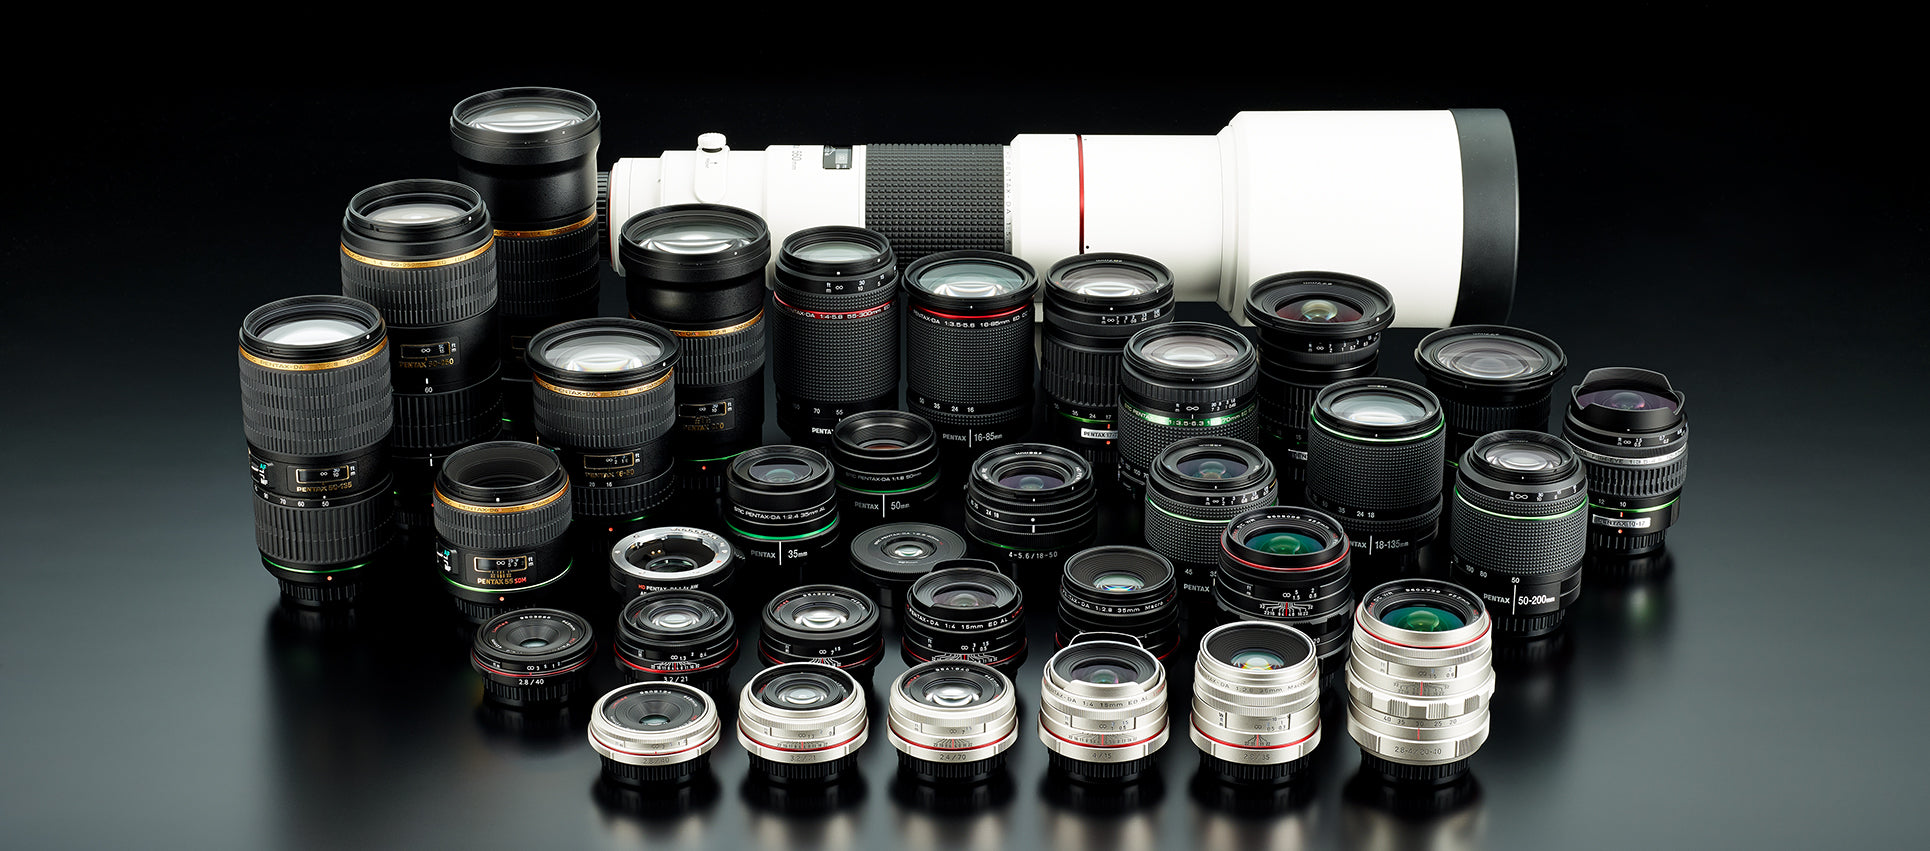 Pentax Lens line up with APS-C and 35 mm lenses